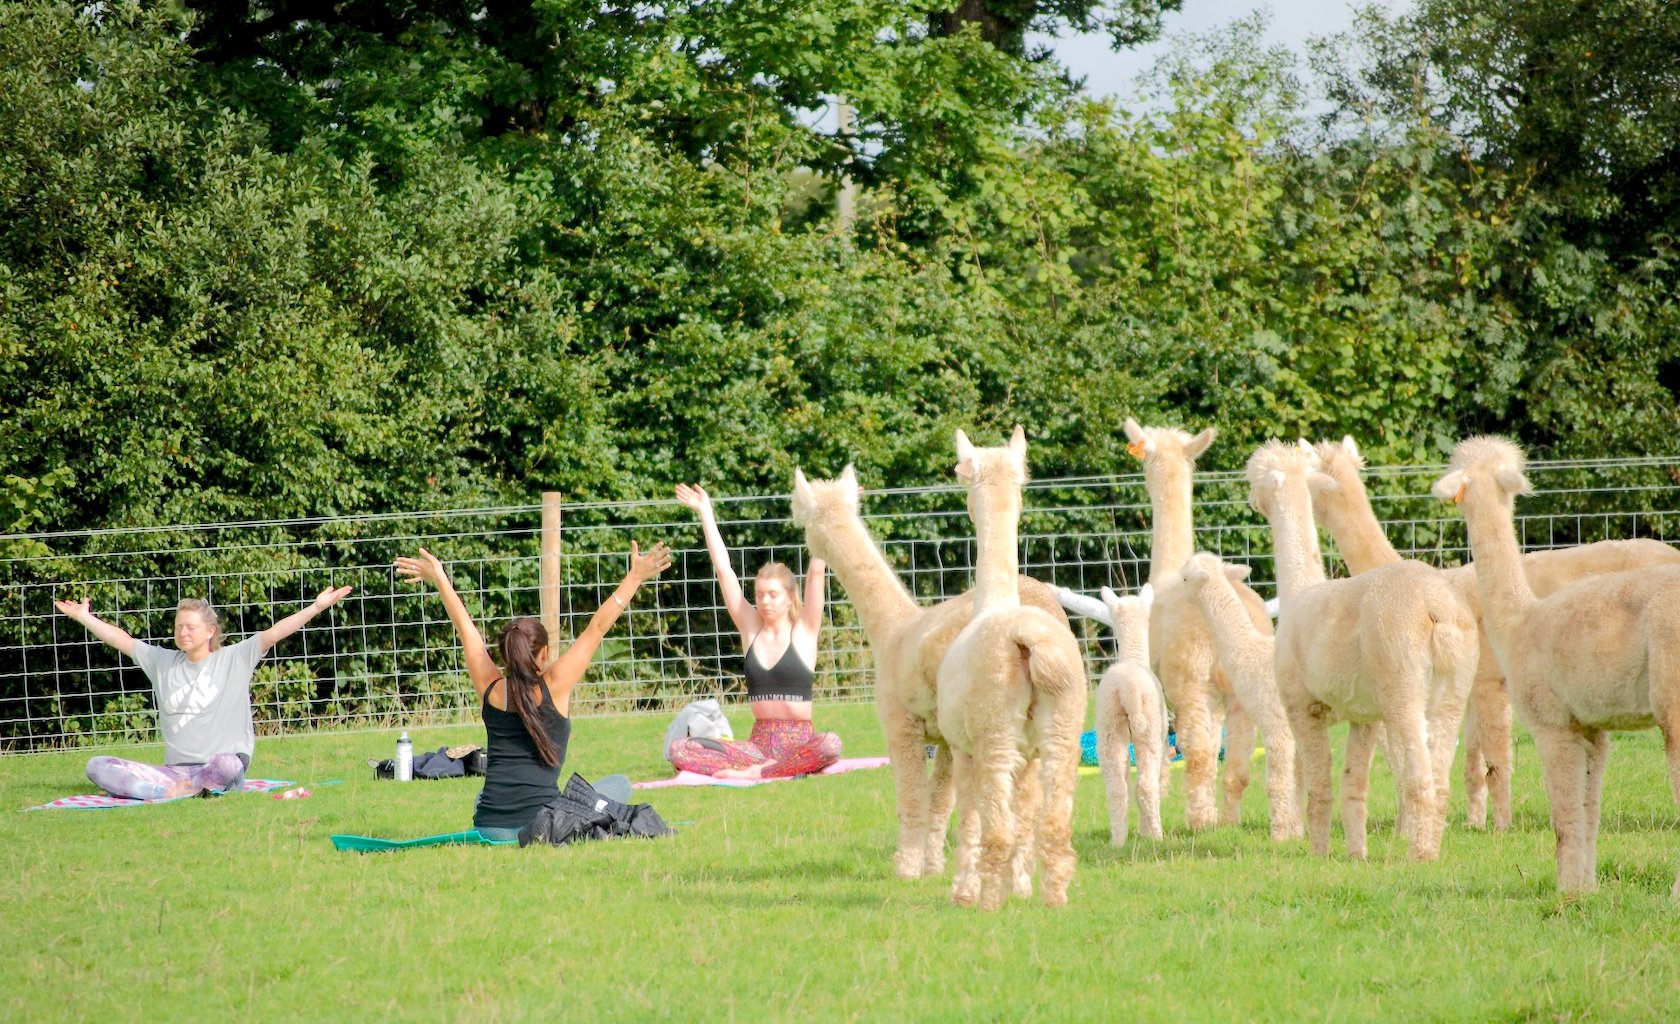 A group doing alpaca yoga in a field surrounded by alpacas at Rosebud Ranch in the UK